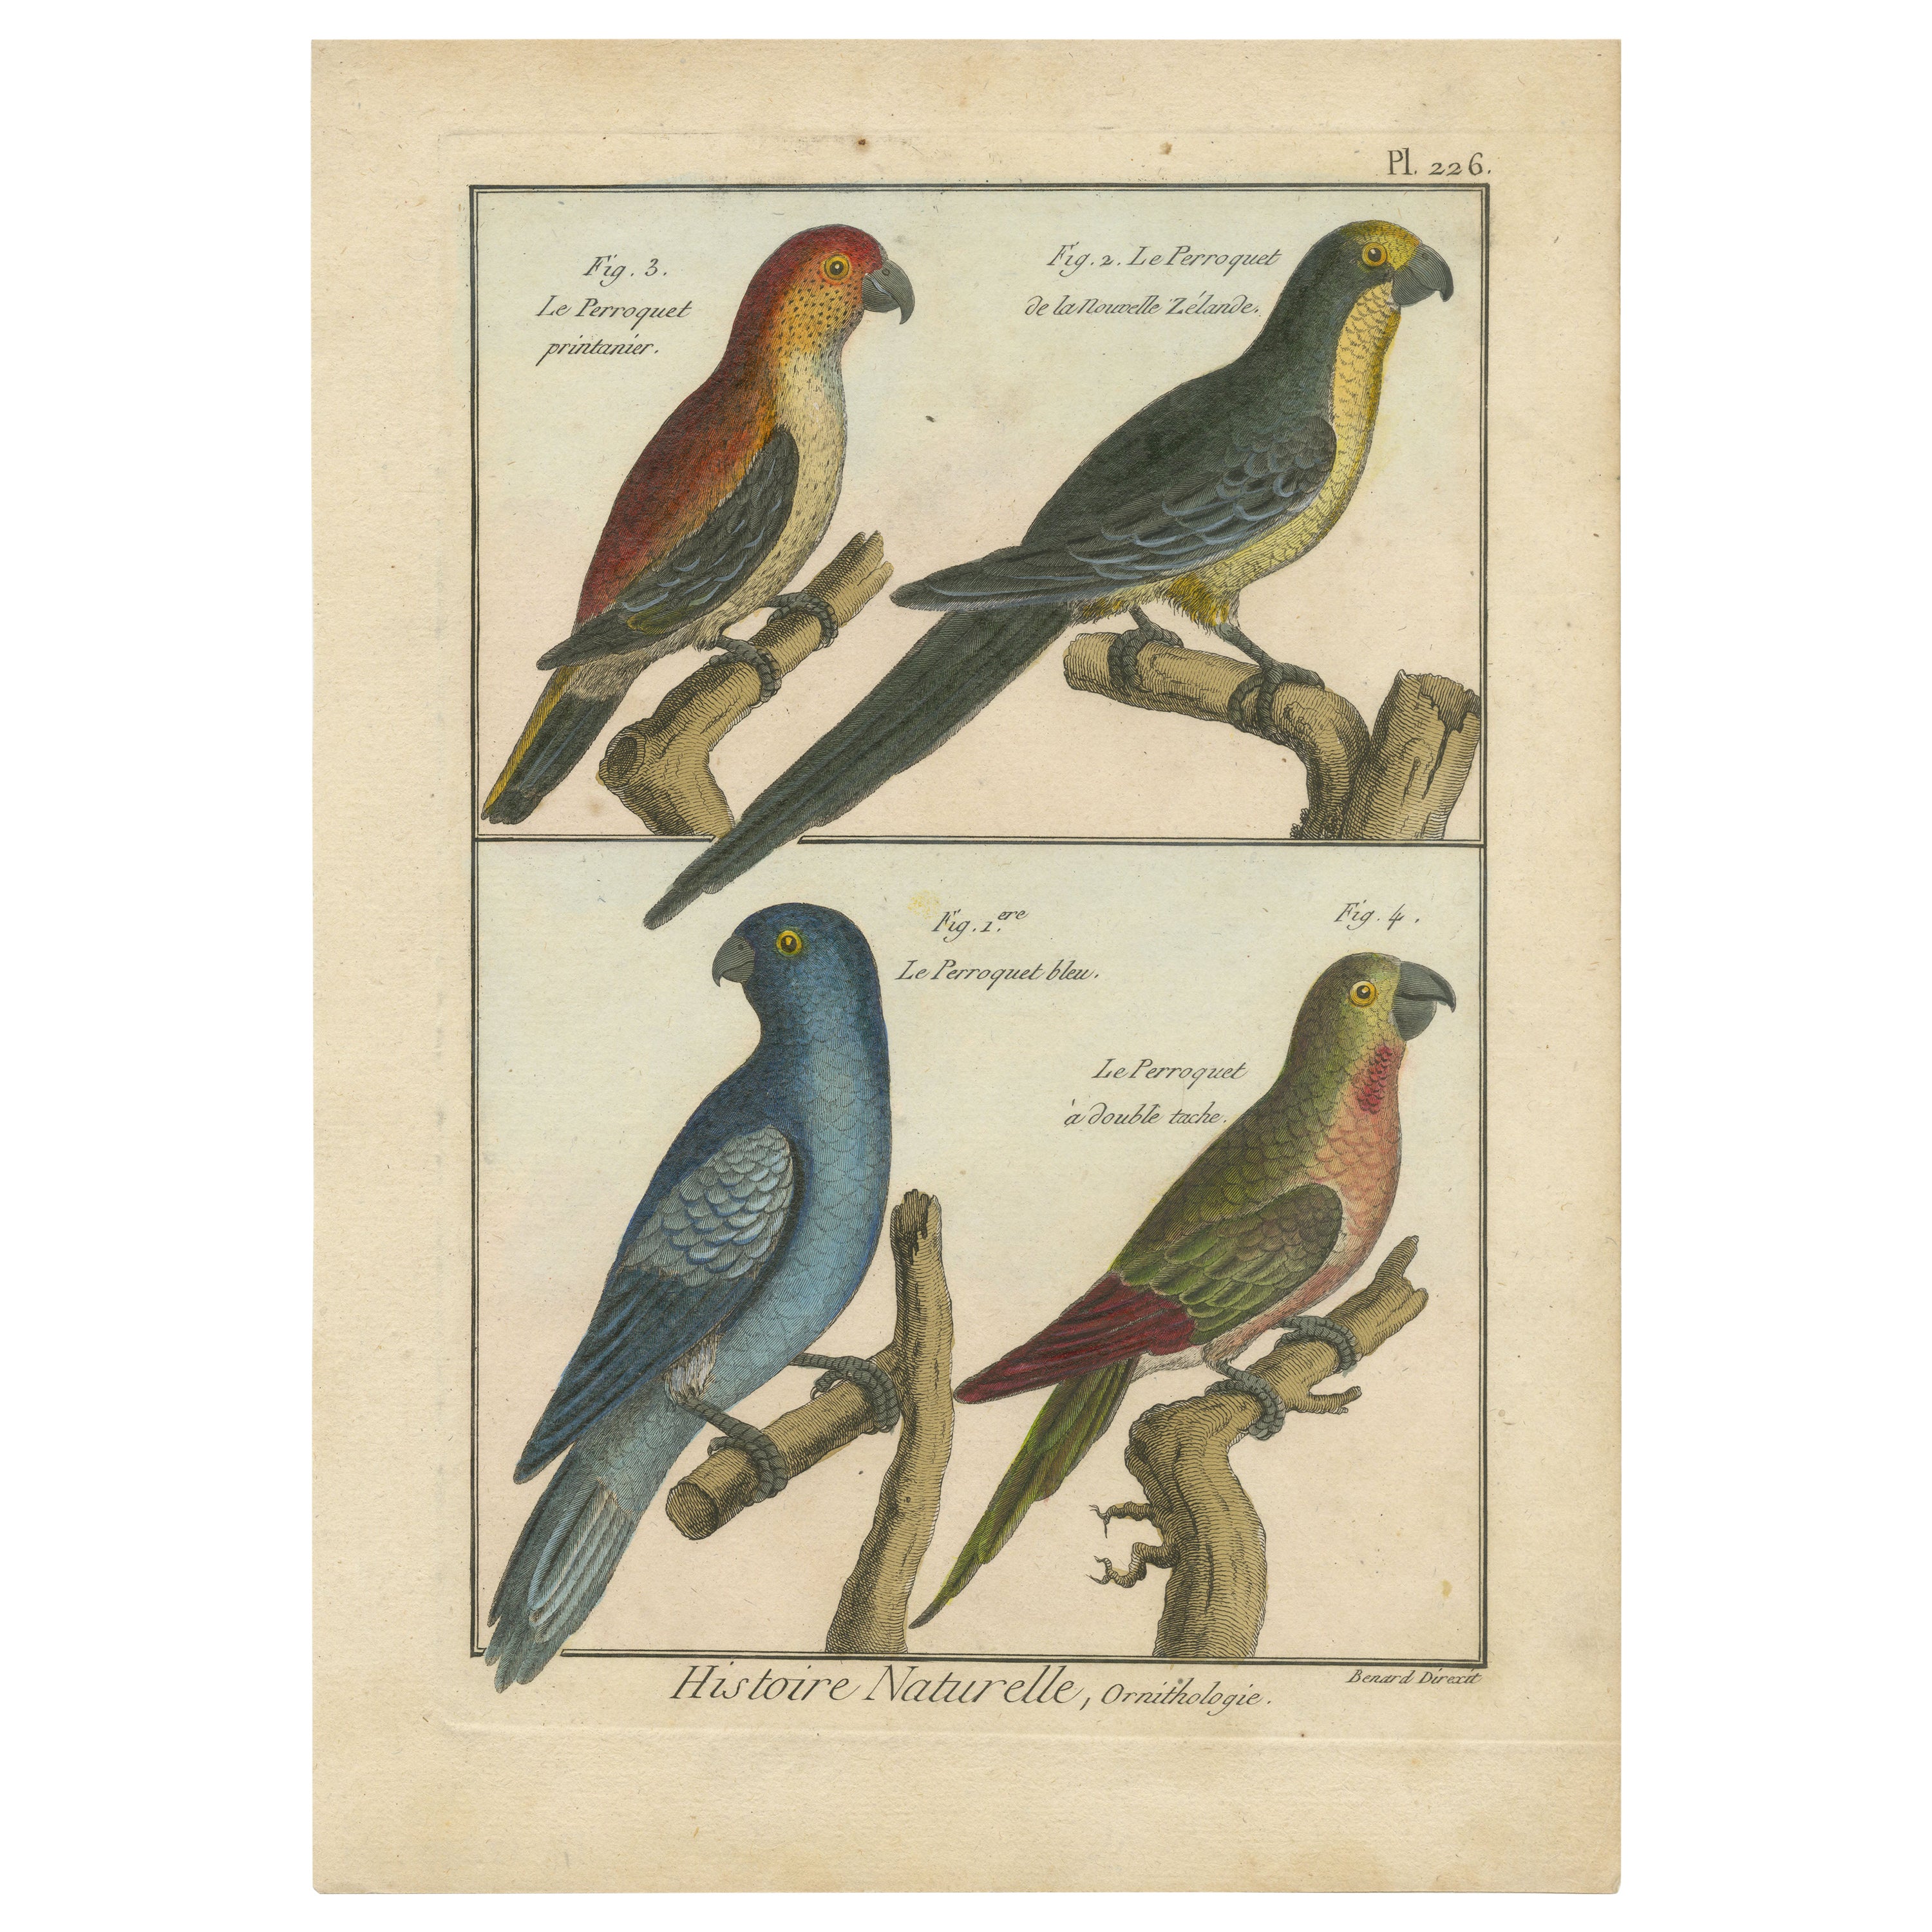 Richly Hand-Colored, Authentic Copper Engraving of 4 Parrots(1792)